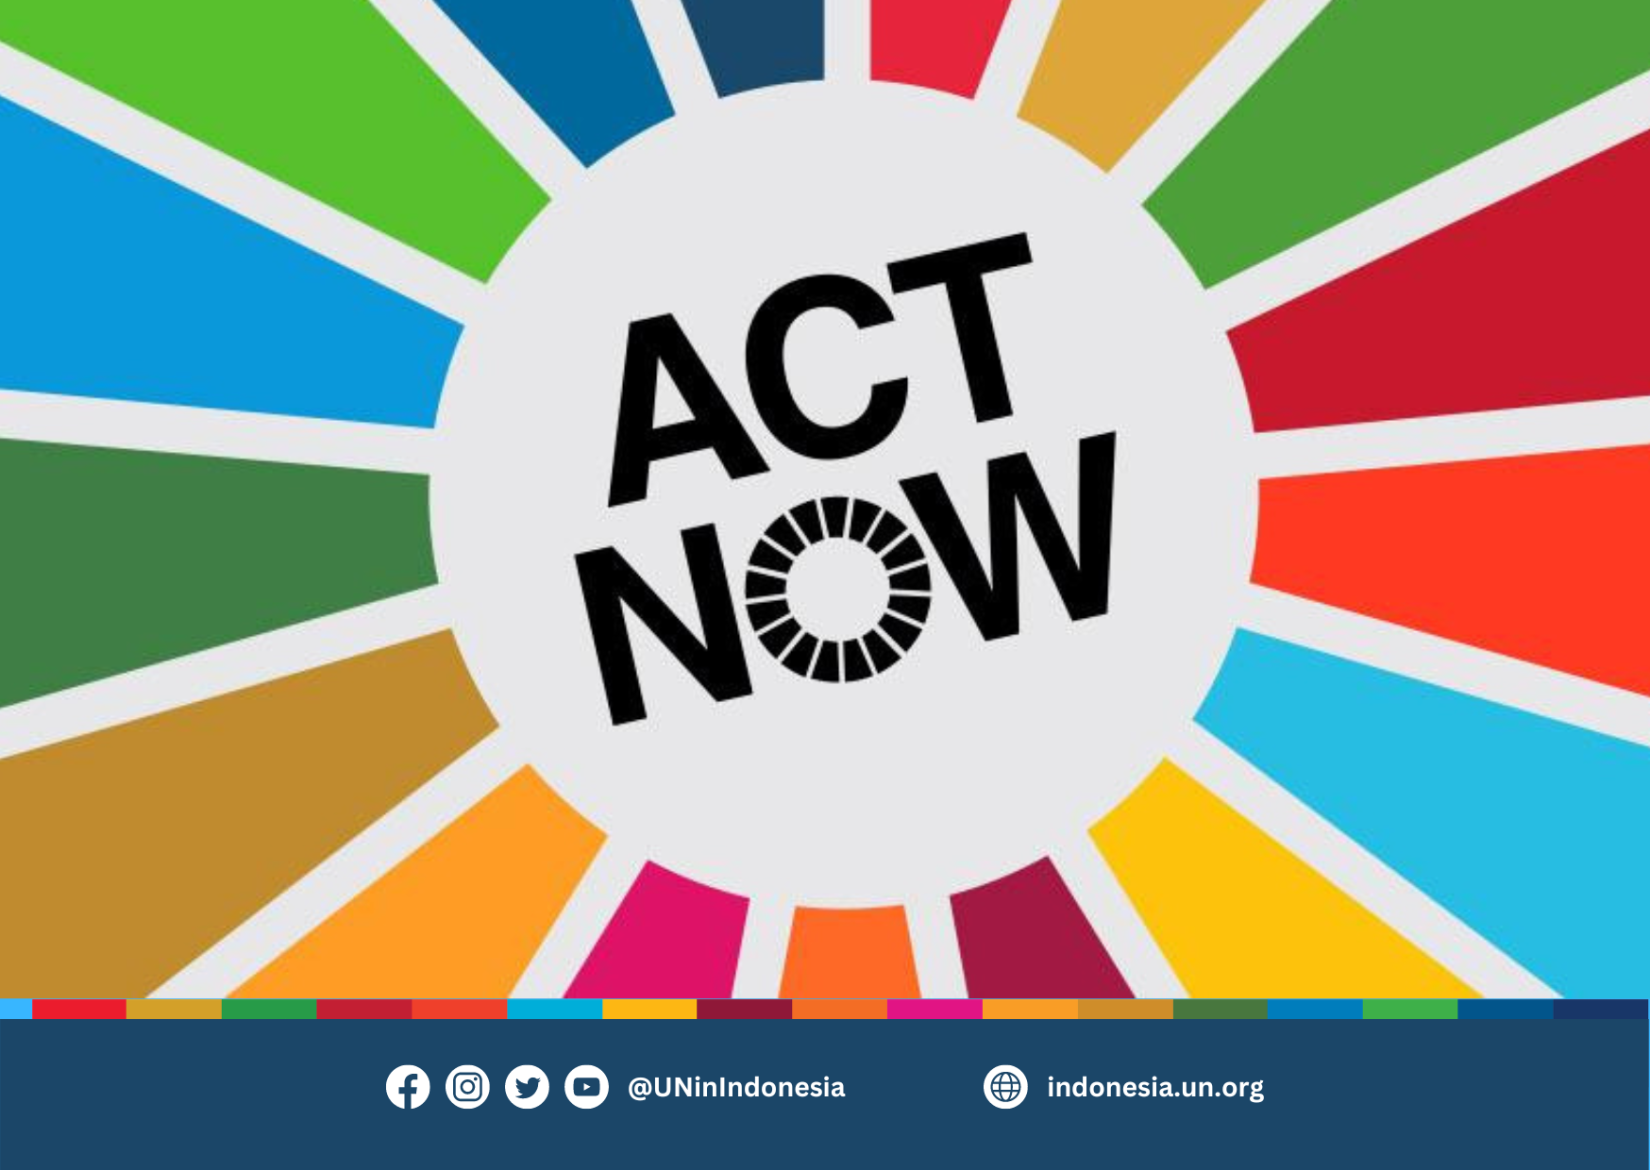 Image of ActNow Campaign for SDGs by the United Nations